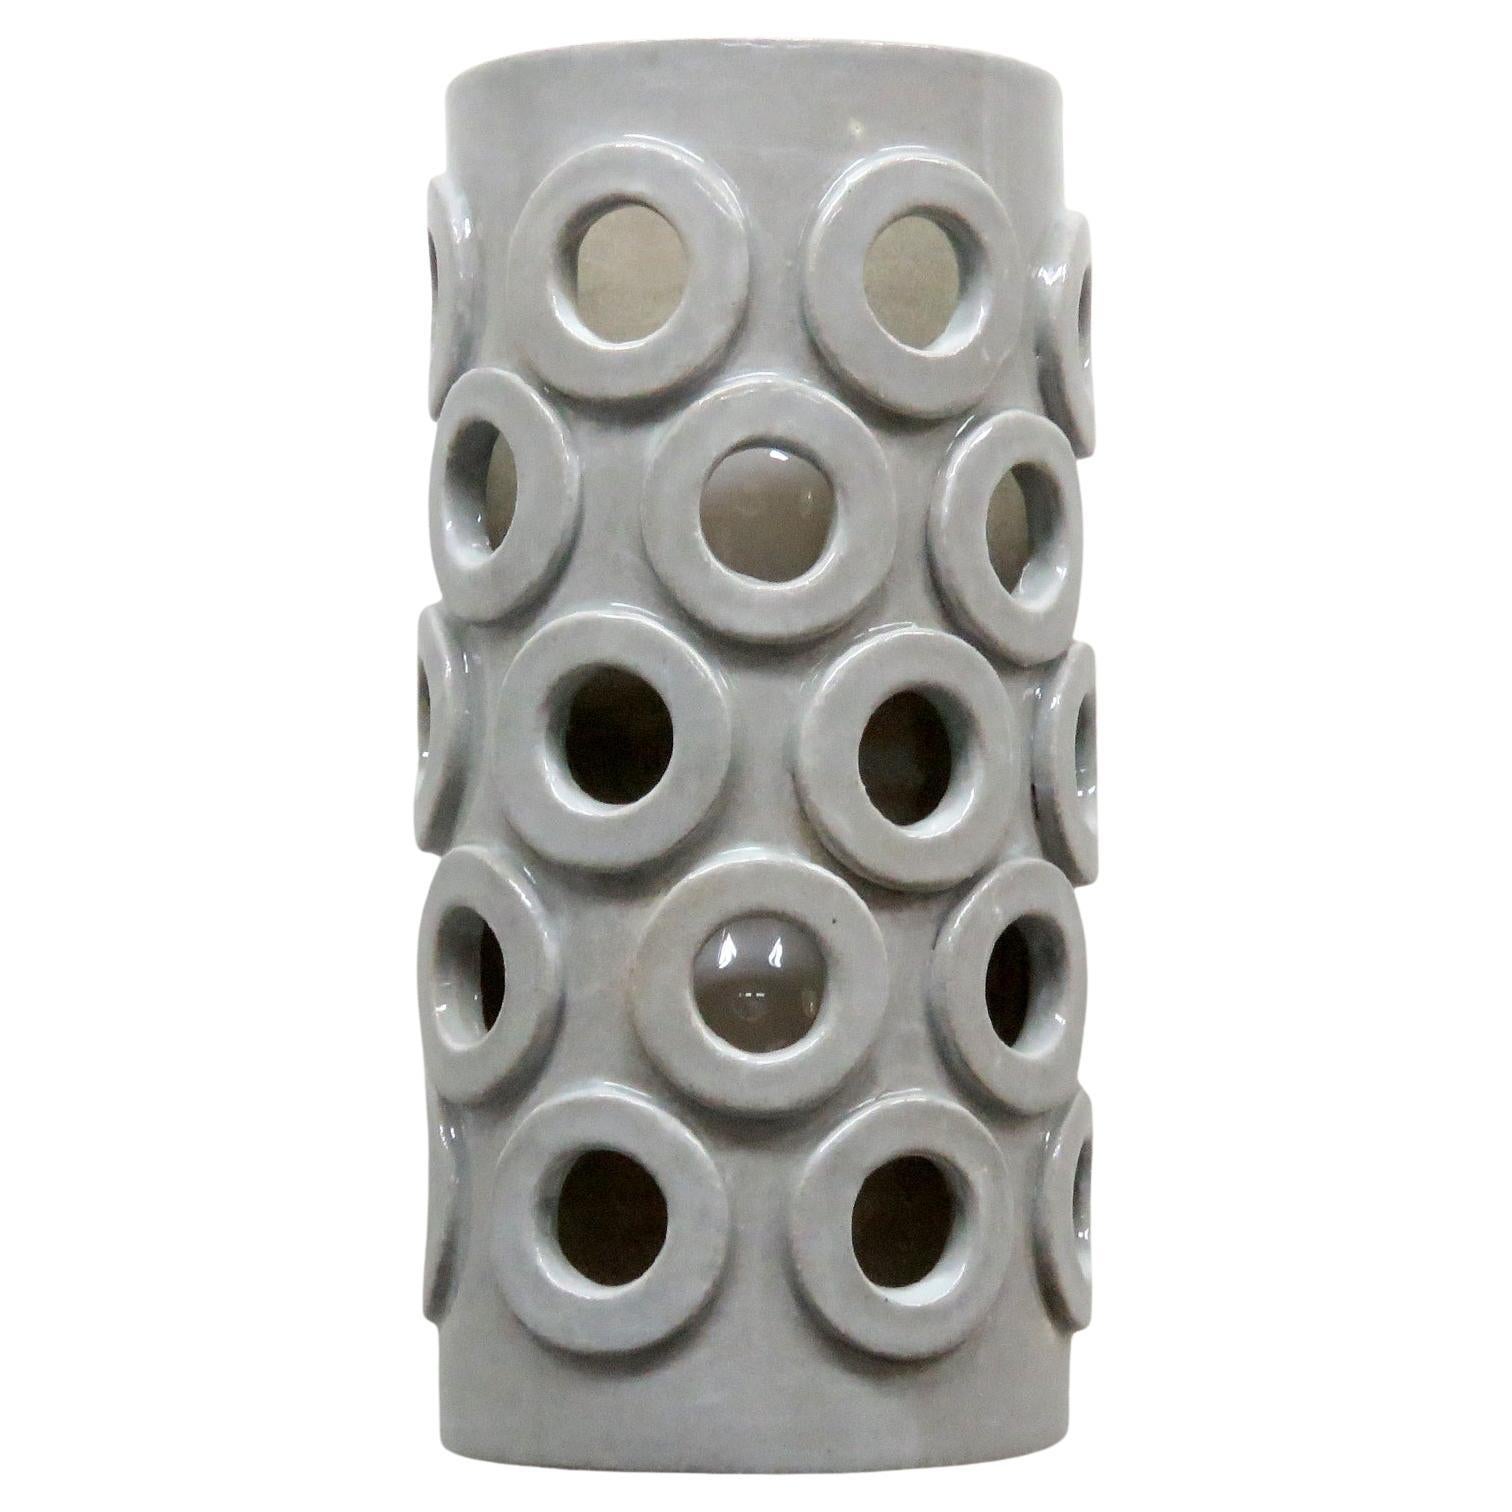 Tall Ceramic Wall Light No.51 by Heather Levine